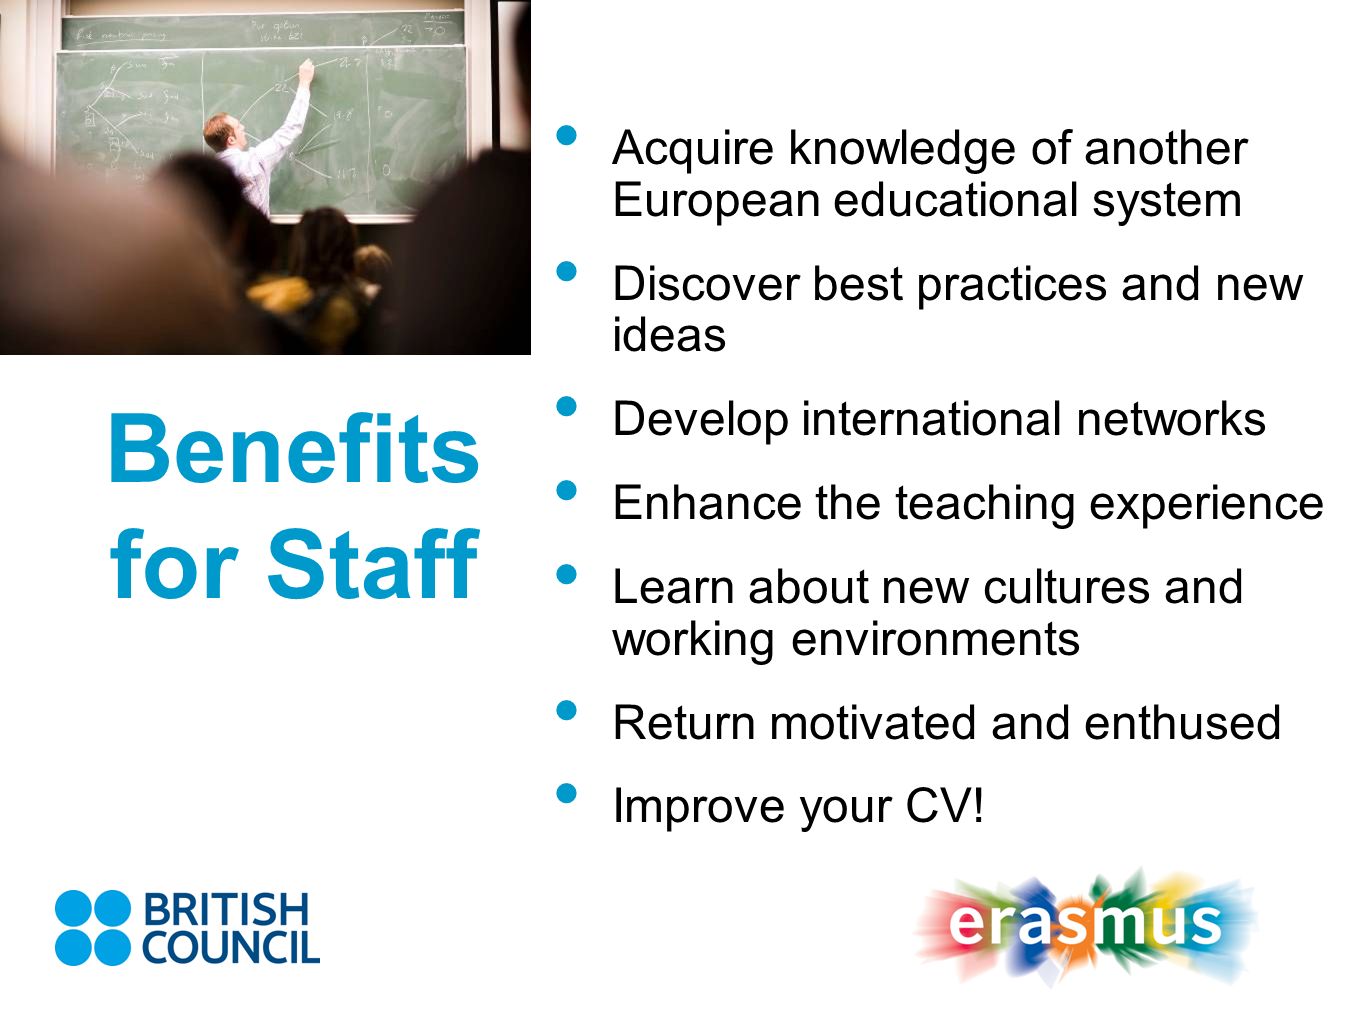 Acquire knowledge of another European educational system